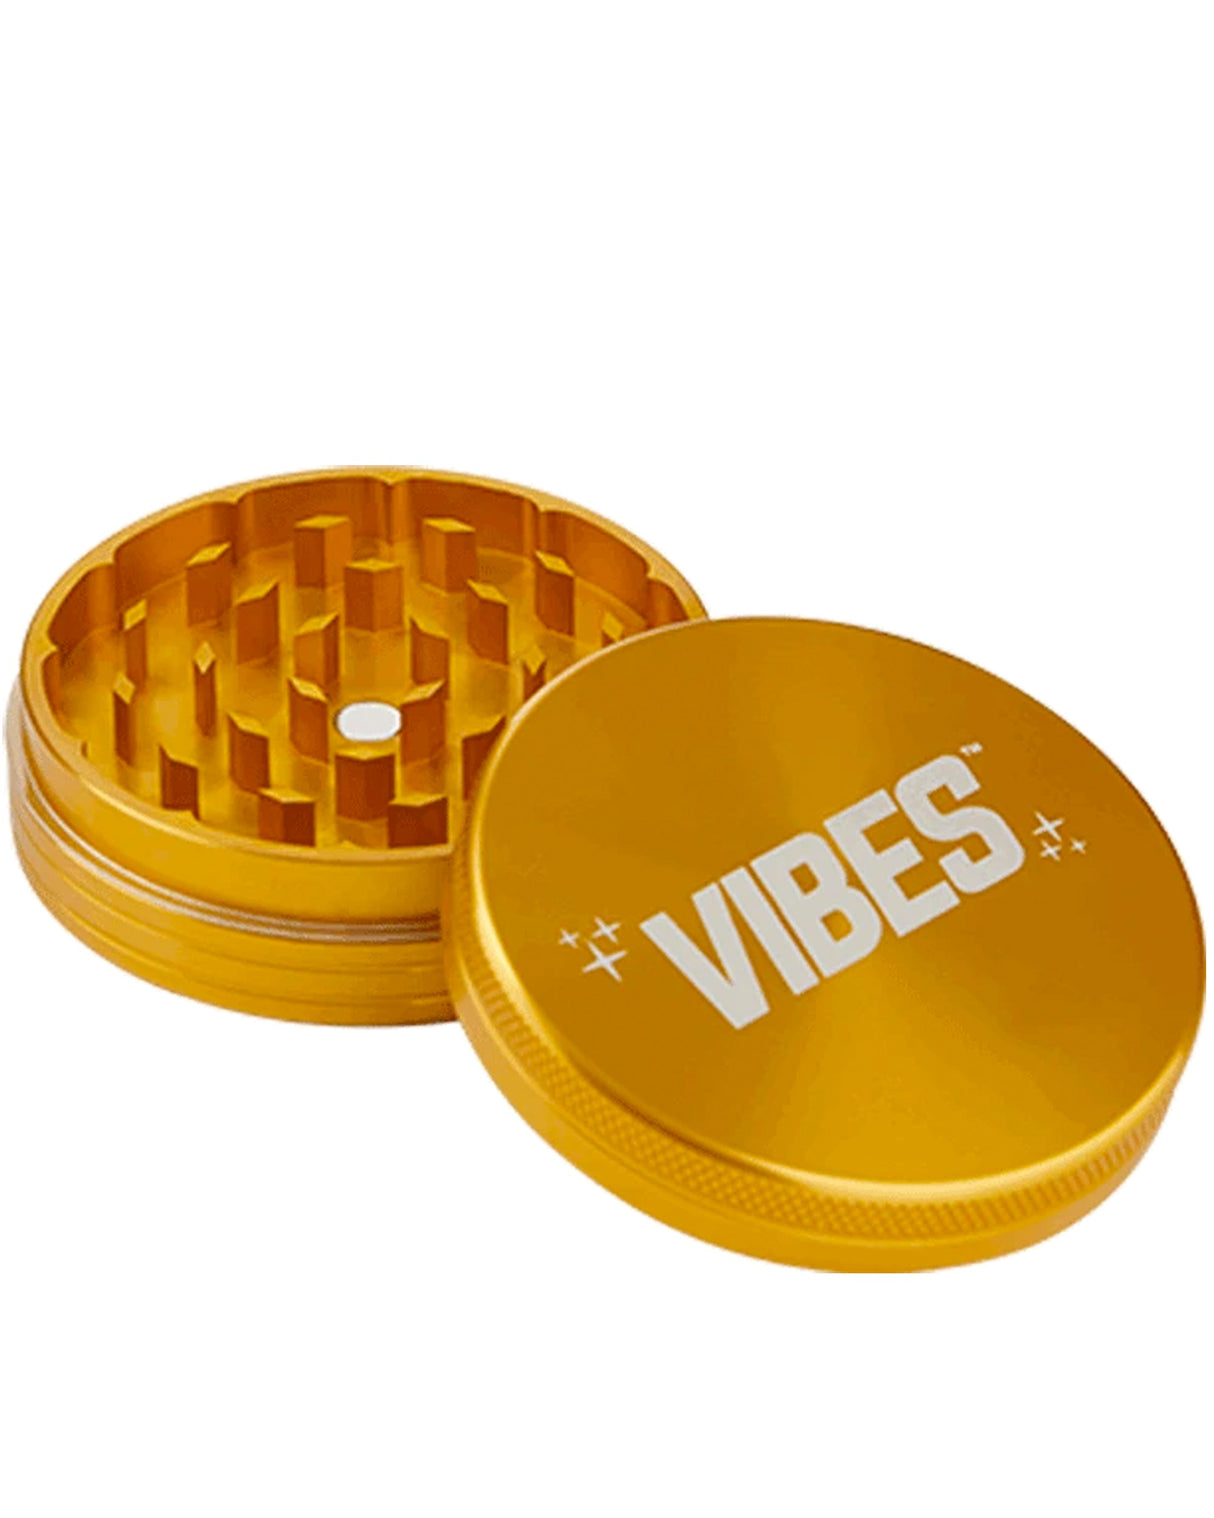 Vibes 2-Piece Grinder in Gold, Portable Aluminum Herb Grinder, 2.5" Size, Top View